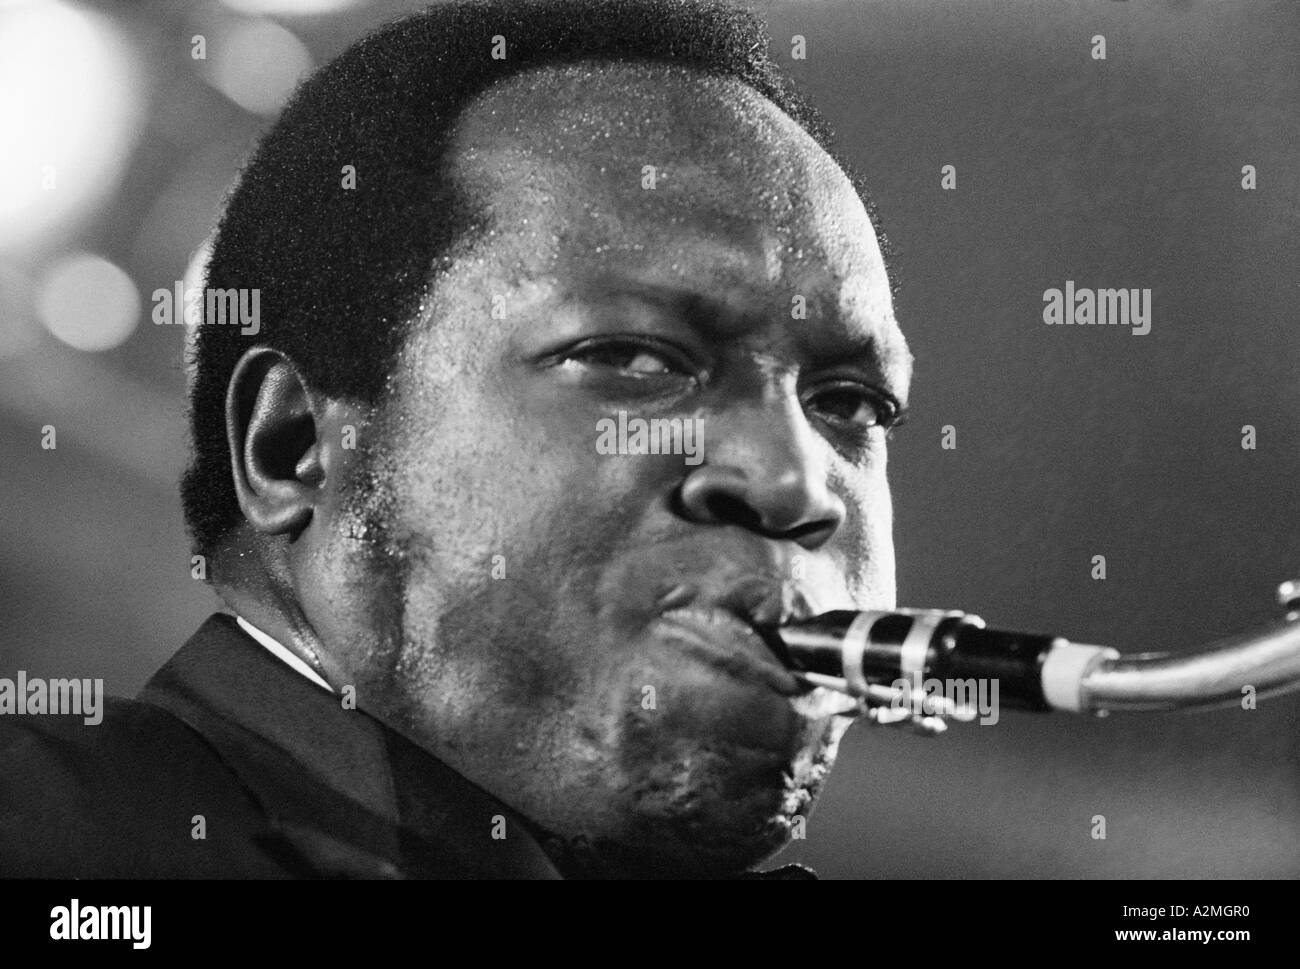 King Curtis, great tenor saxaphone player born 7 Feb 1934 and sadly murdered on 13 Aug 1971. Stock Photo